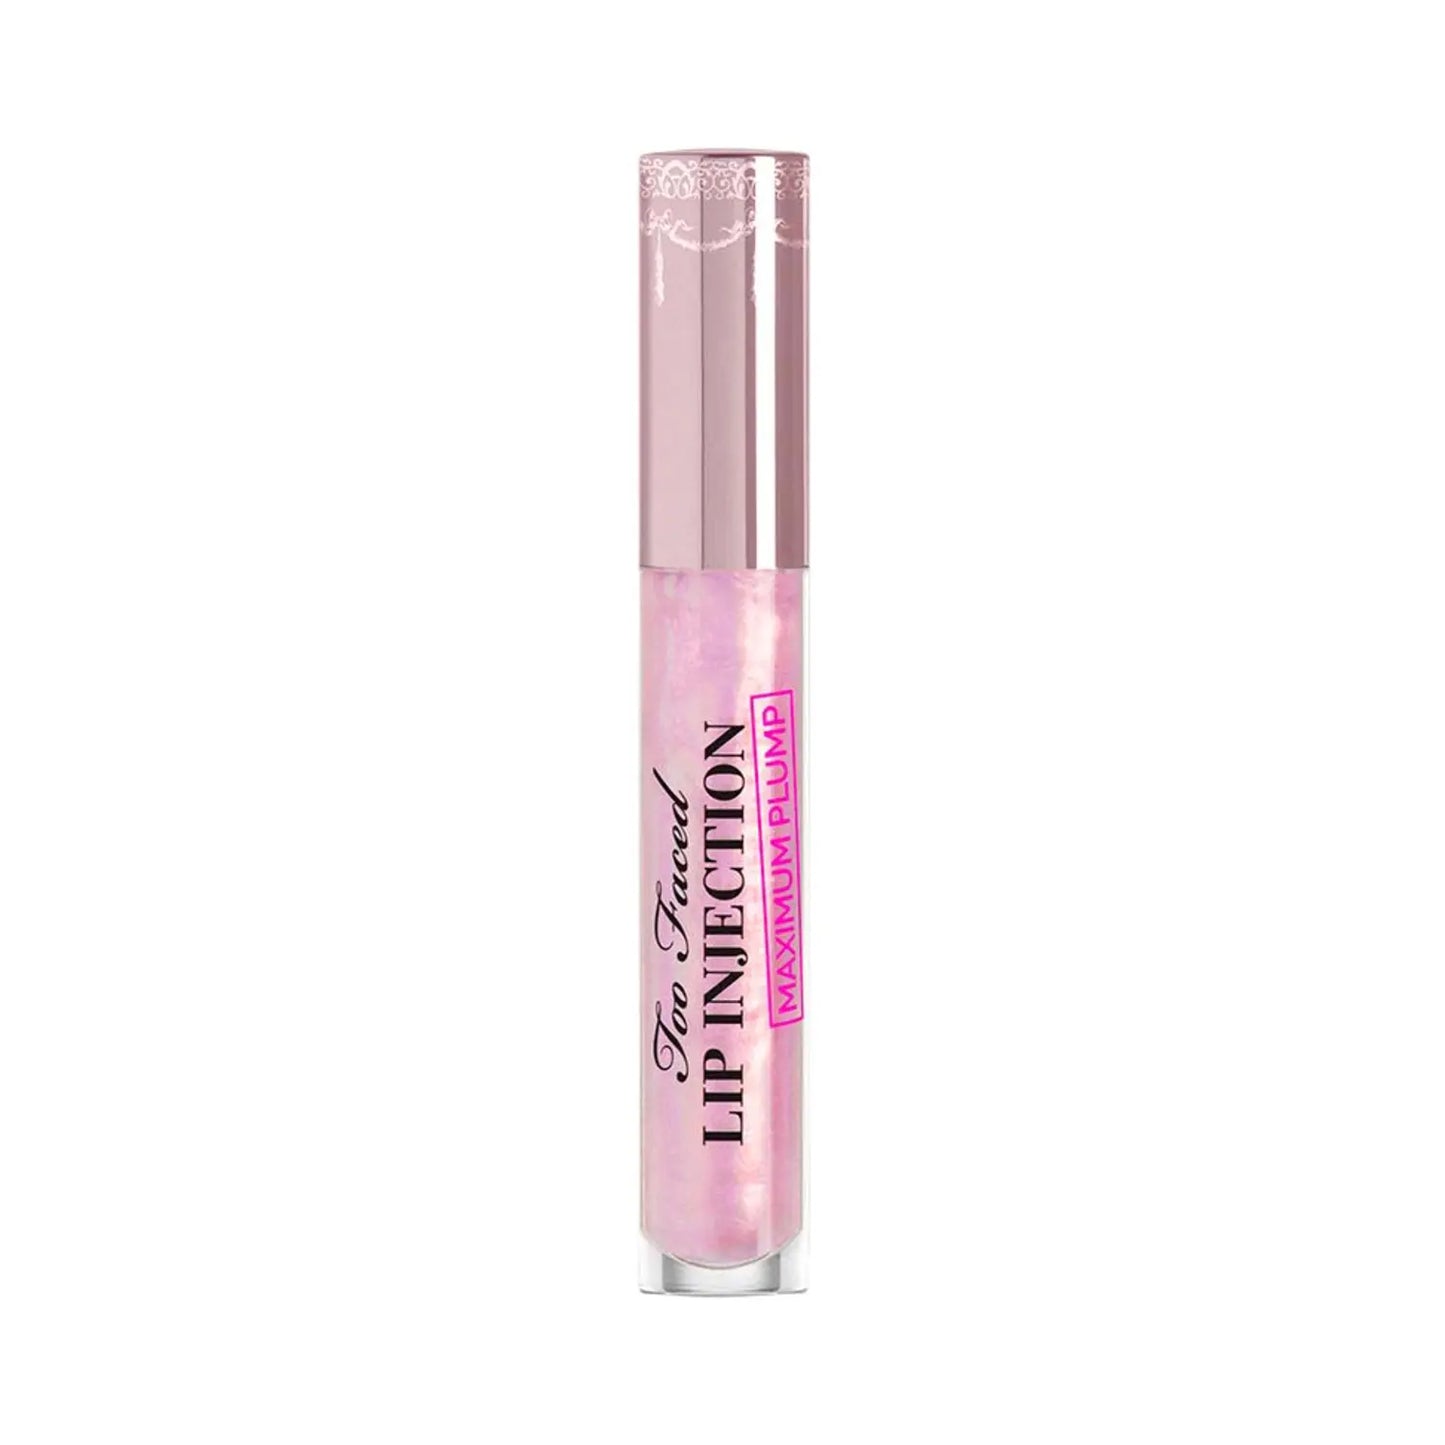 Lip Injection Extreme combo Lip Plumper